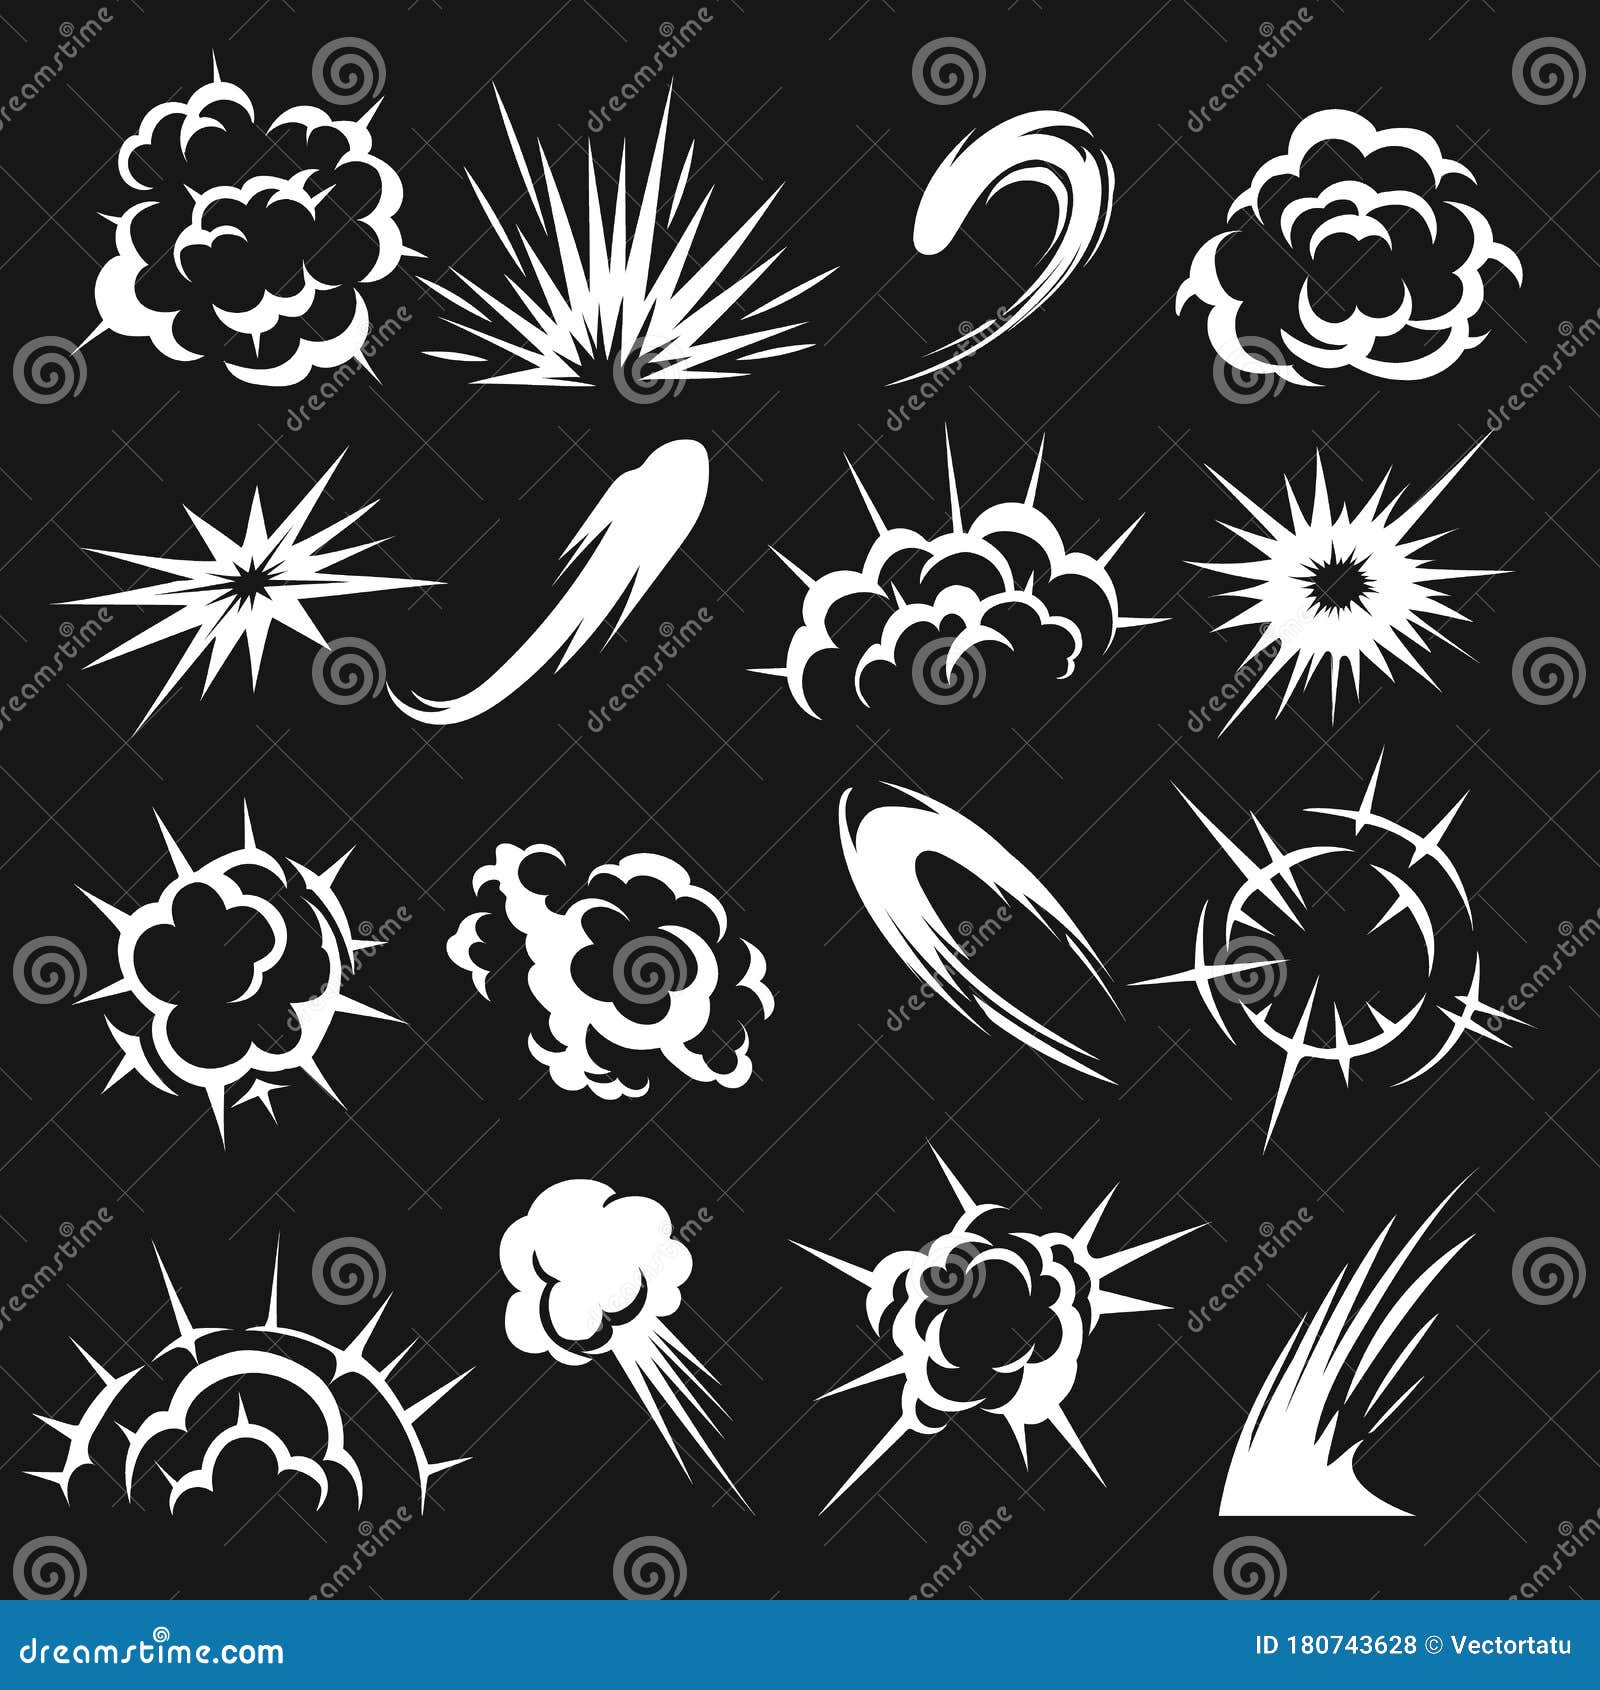 Cartoon Motion Flash Effects Stock Vector - Illustration of concept,  abstract: 180743628